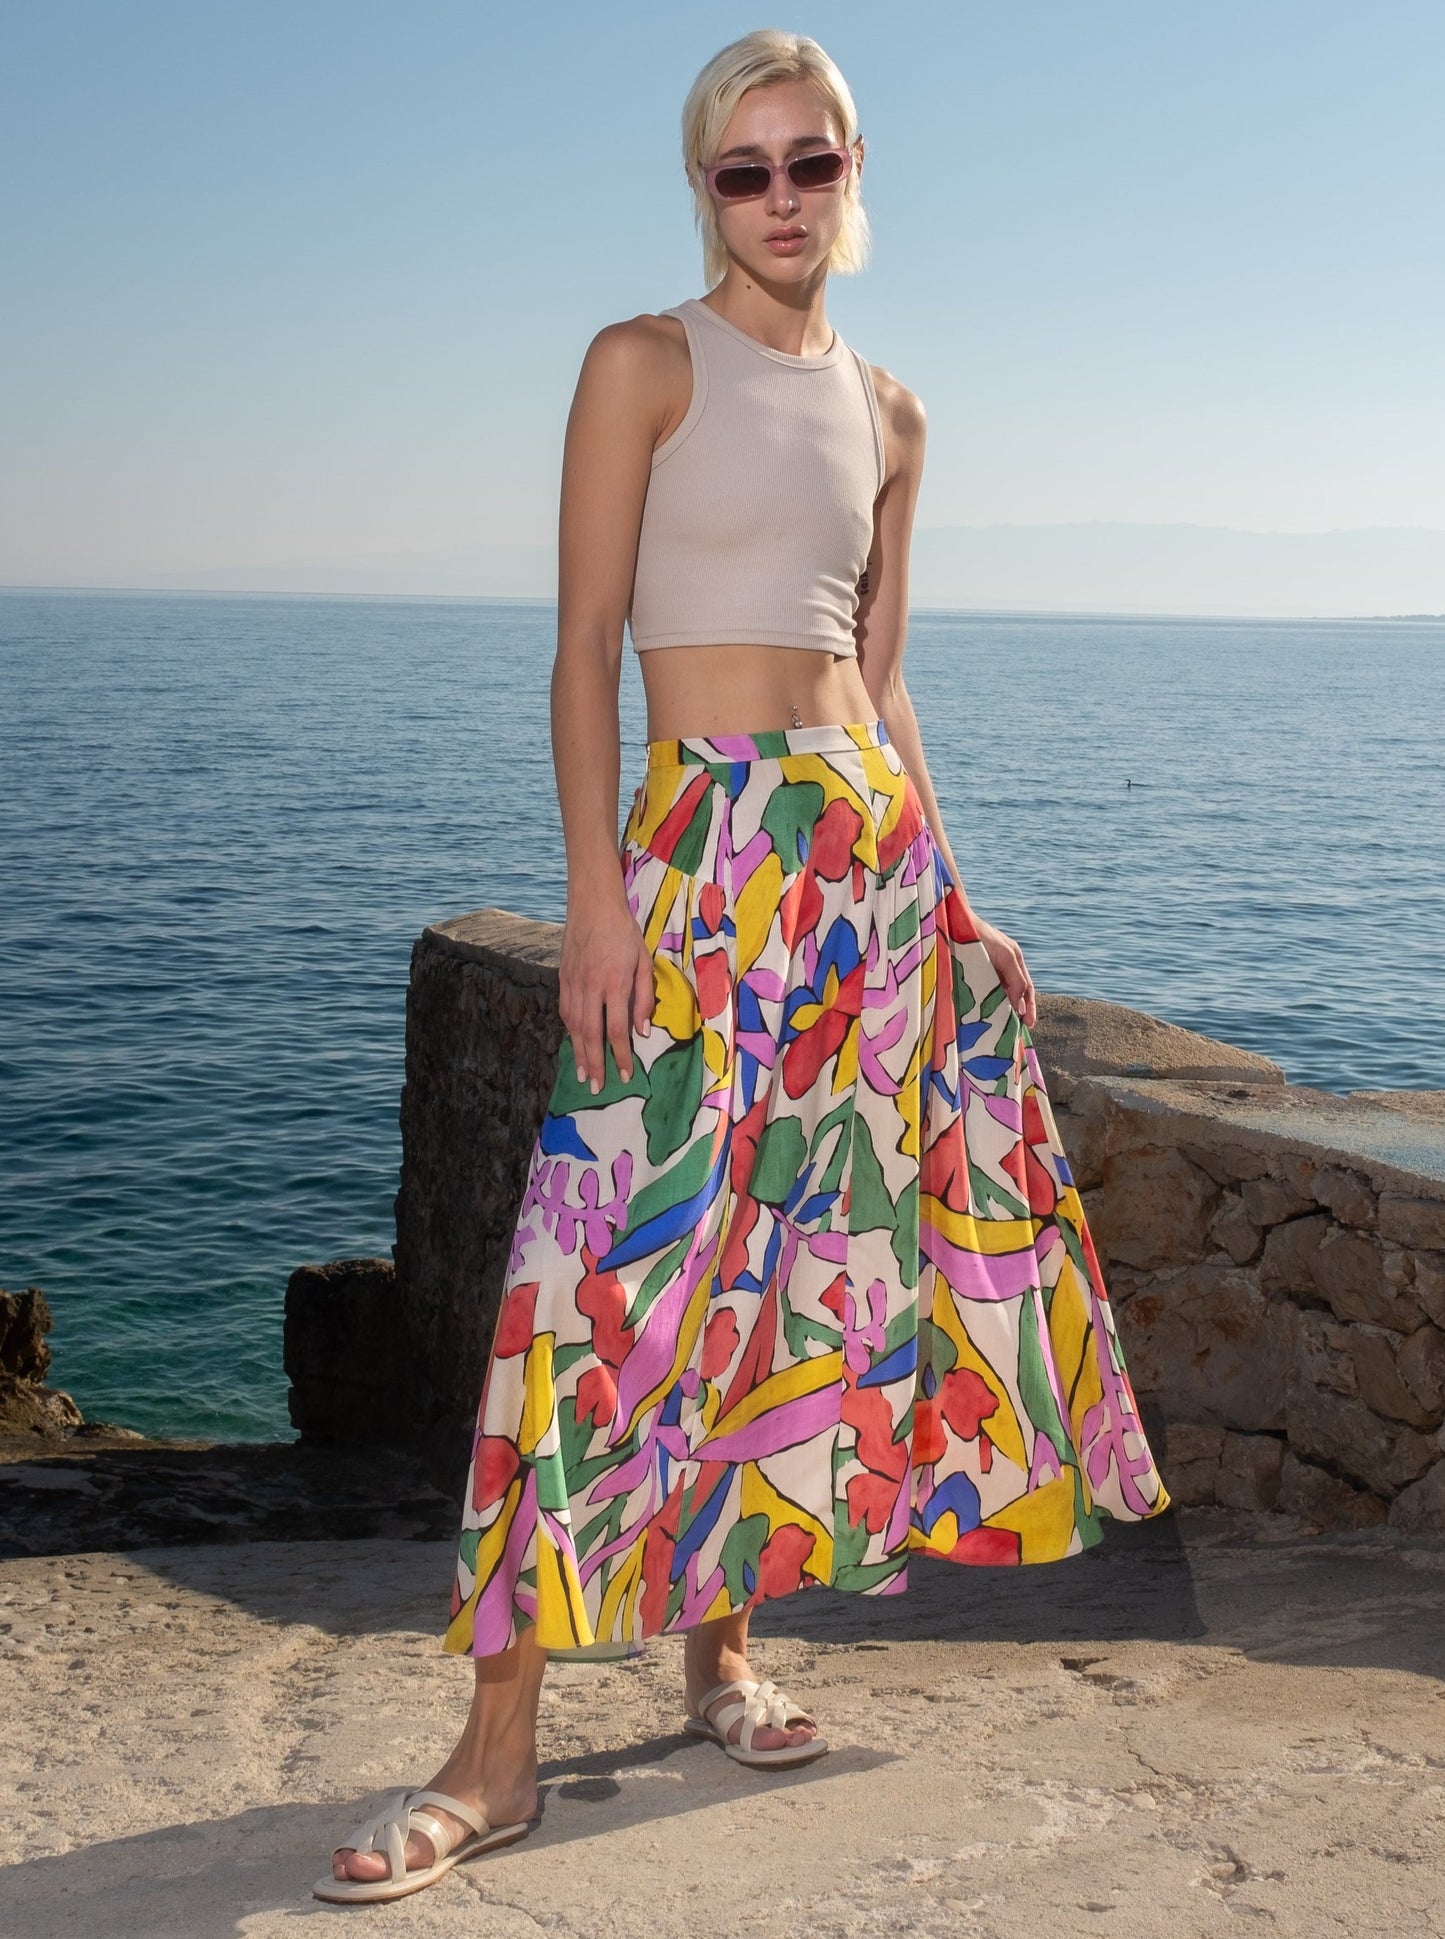 Untitled in Motion: Briez Skirt - Solas